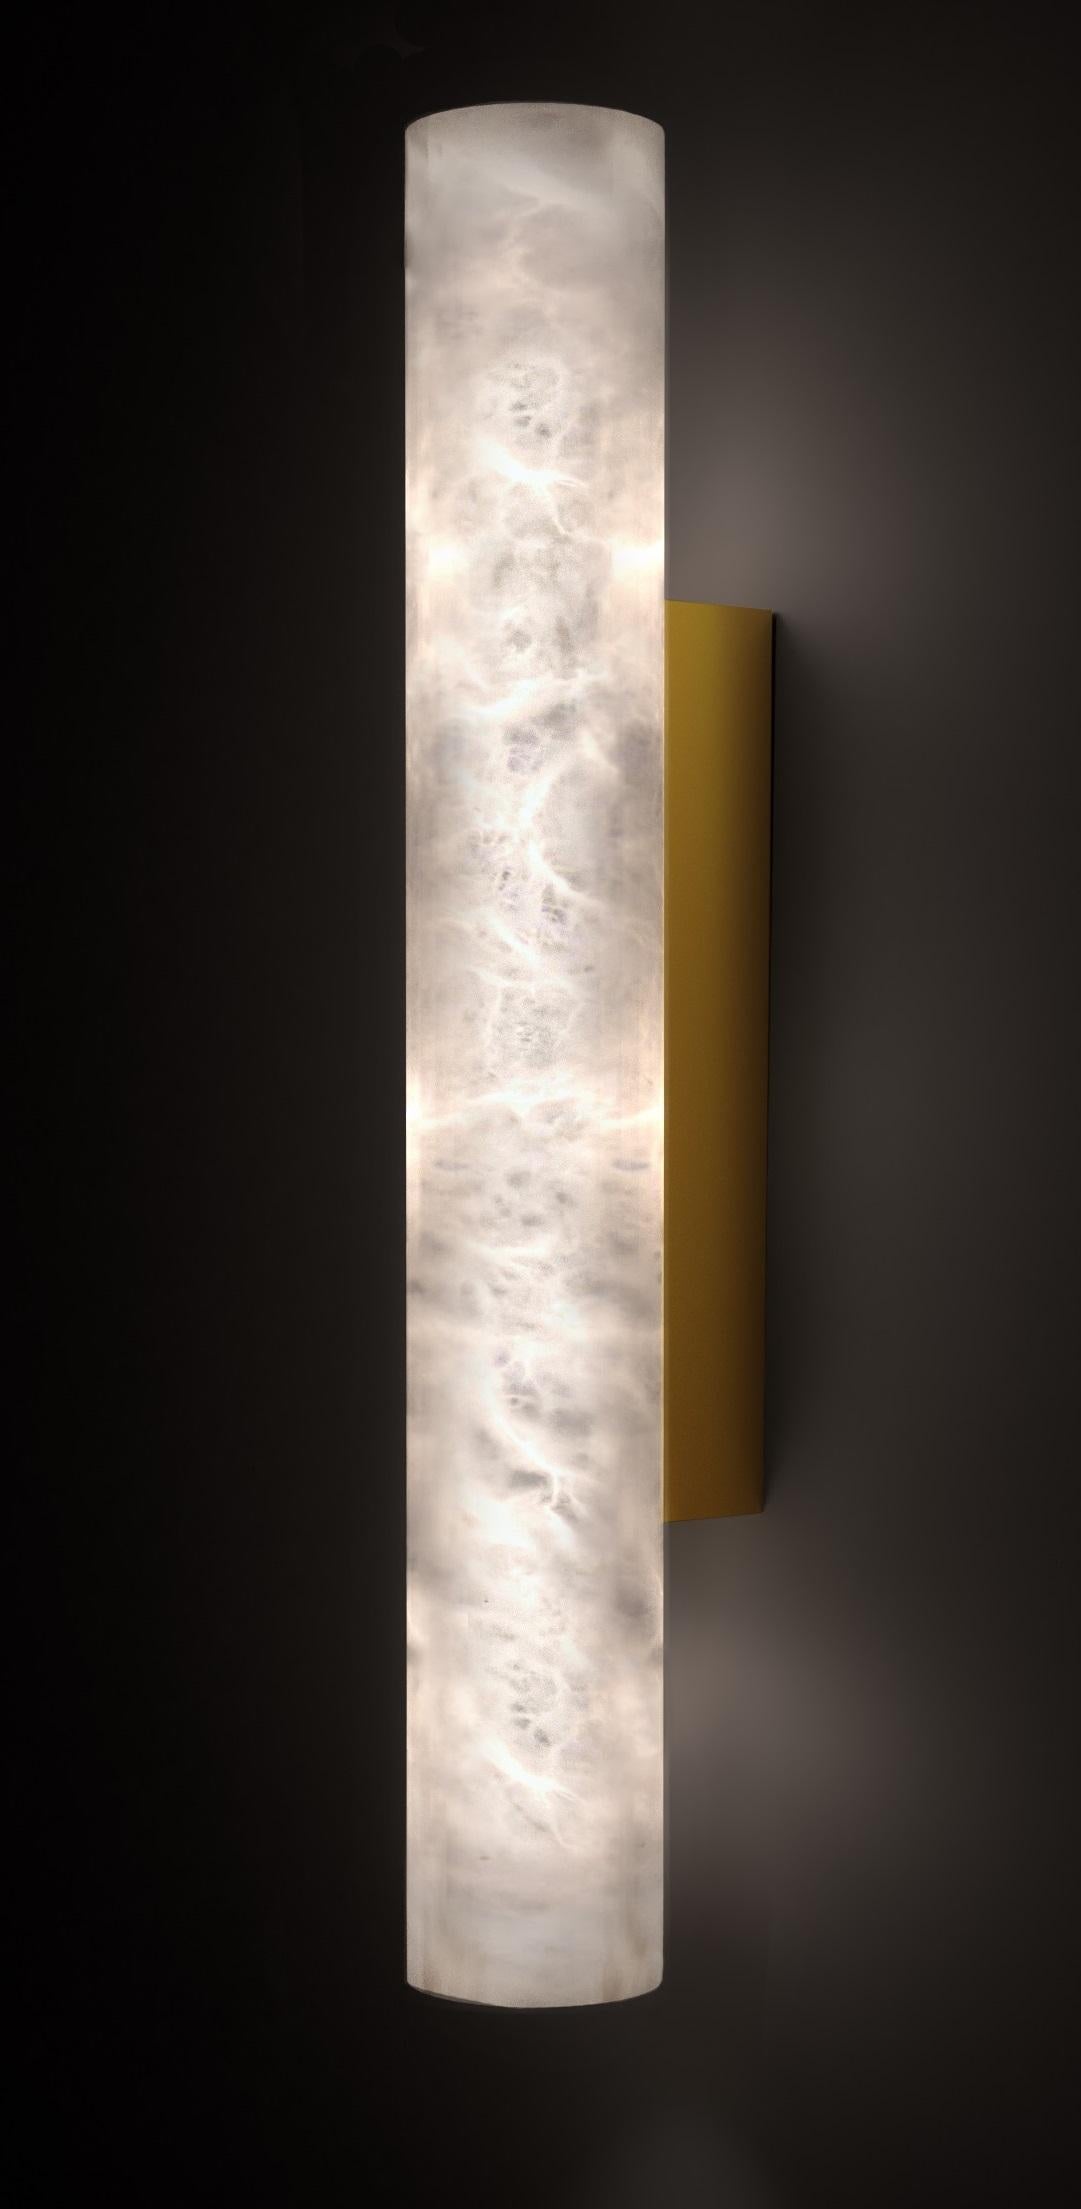 Kendō 1 Medium Brushed Brass Applique by Alabastro Italiano
Dimensions: Ø 8 x H 50 cm.
Materials: White alabaster and brushed brass.

Available in different finishes: Shiny Silver, Bronze, Brushed Brass, Ruggine of Florence, Brushed Burnished, Shiny